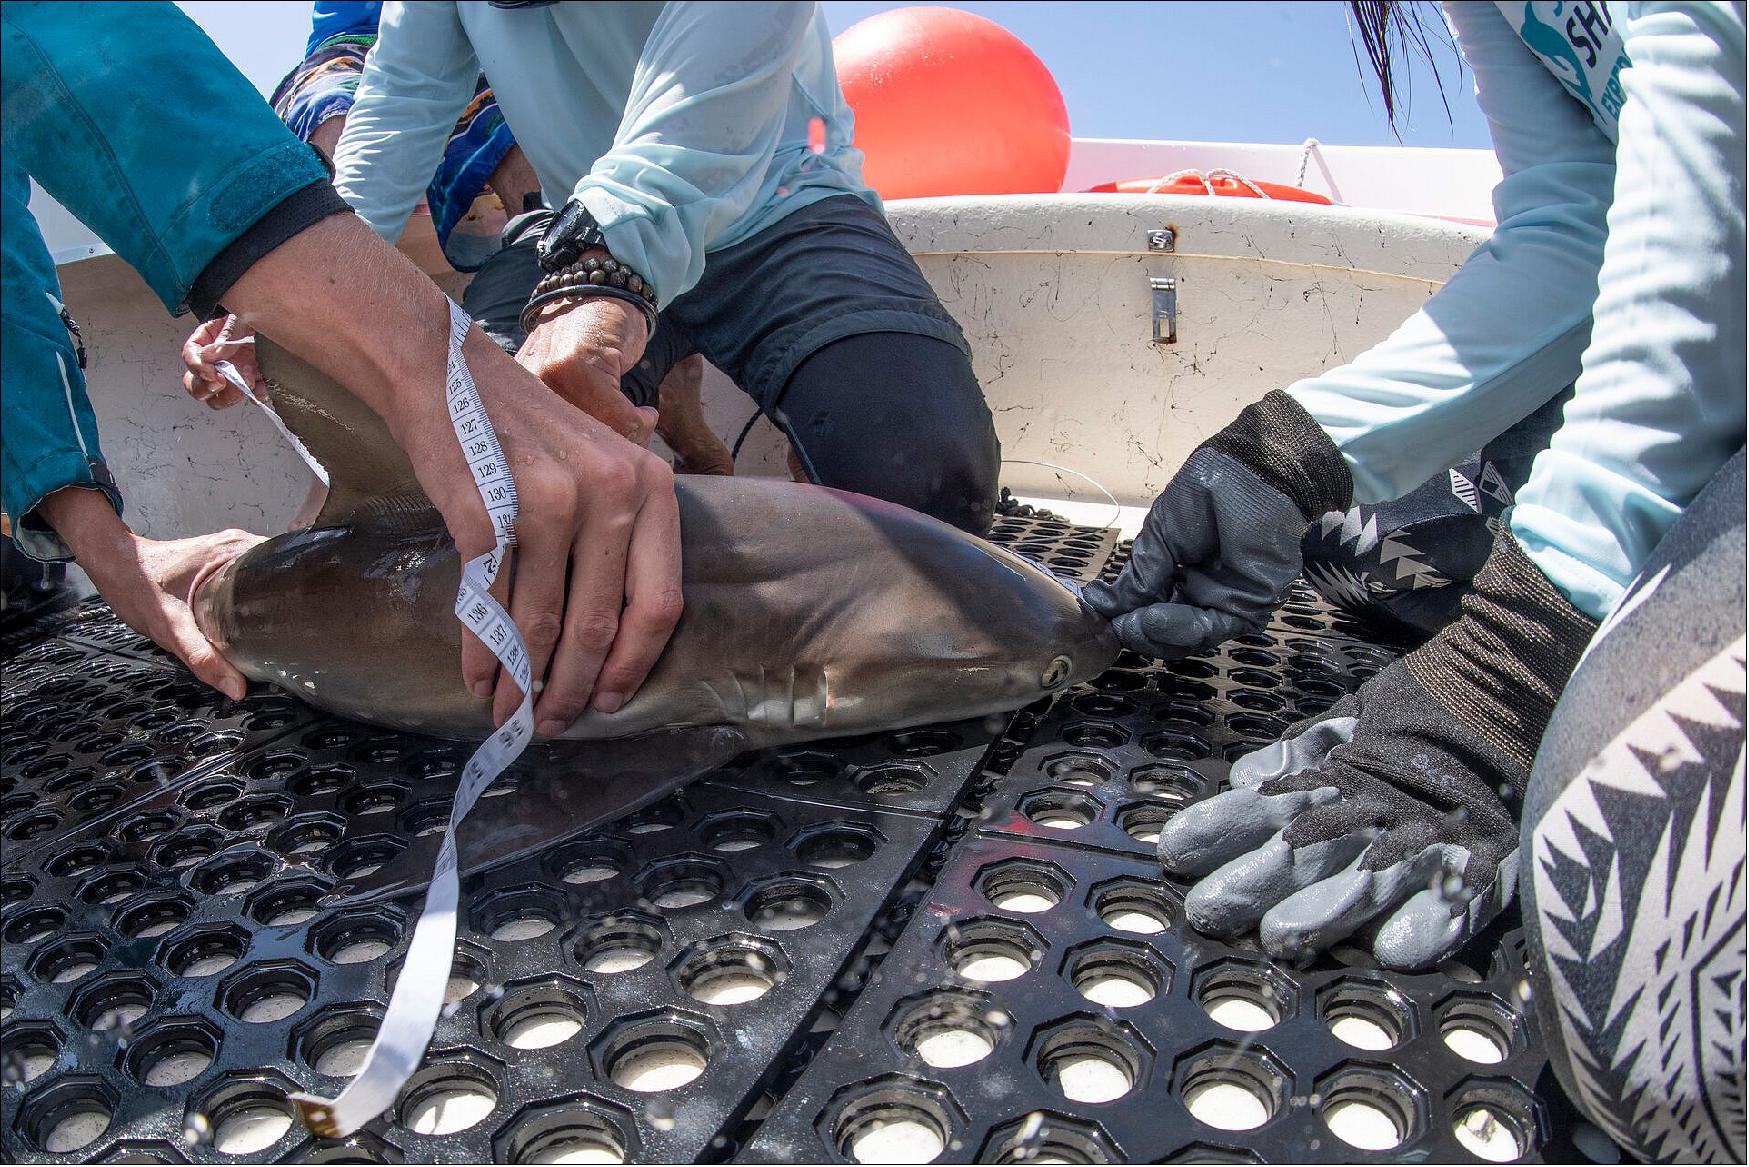 Figure 5: Photo showing the tagging of a tiger shark on deck of a ship (image credit: ESA)